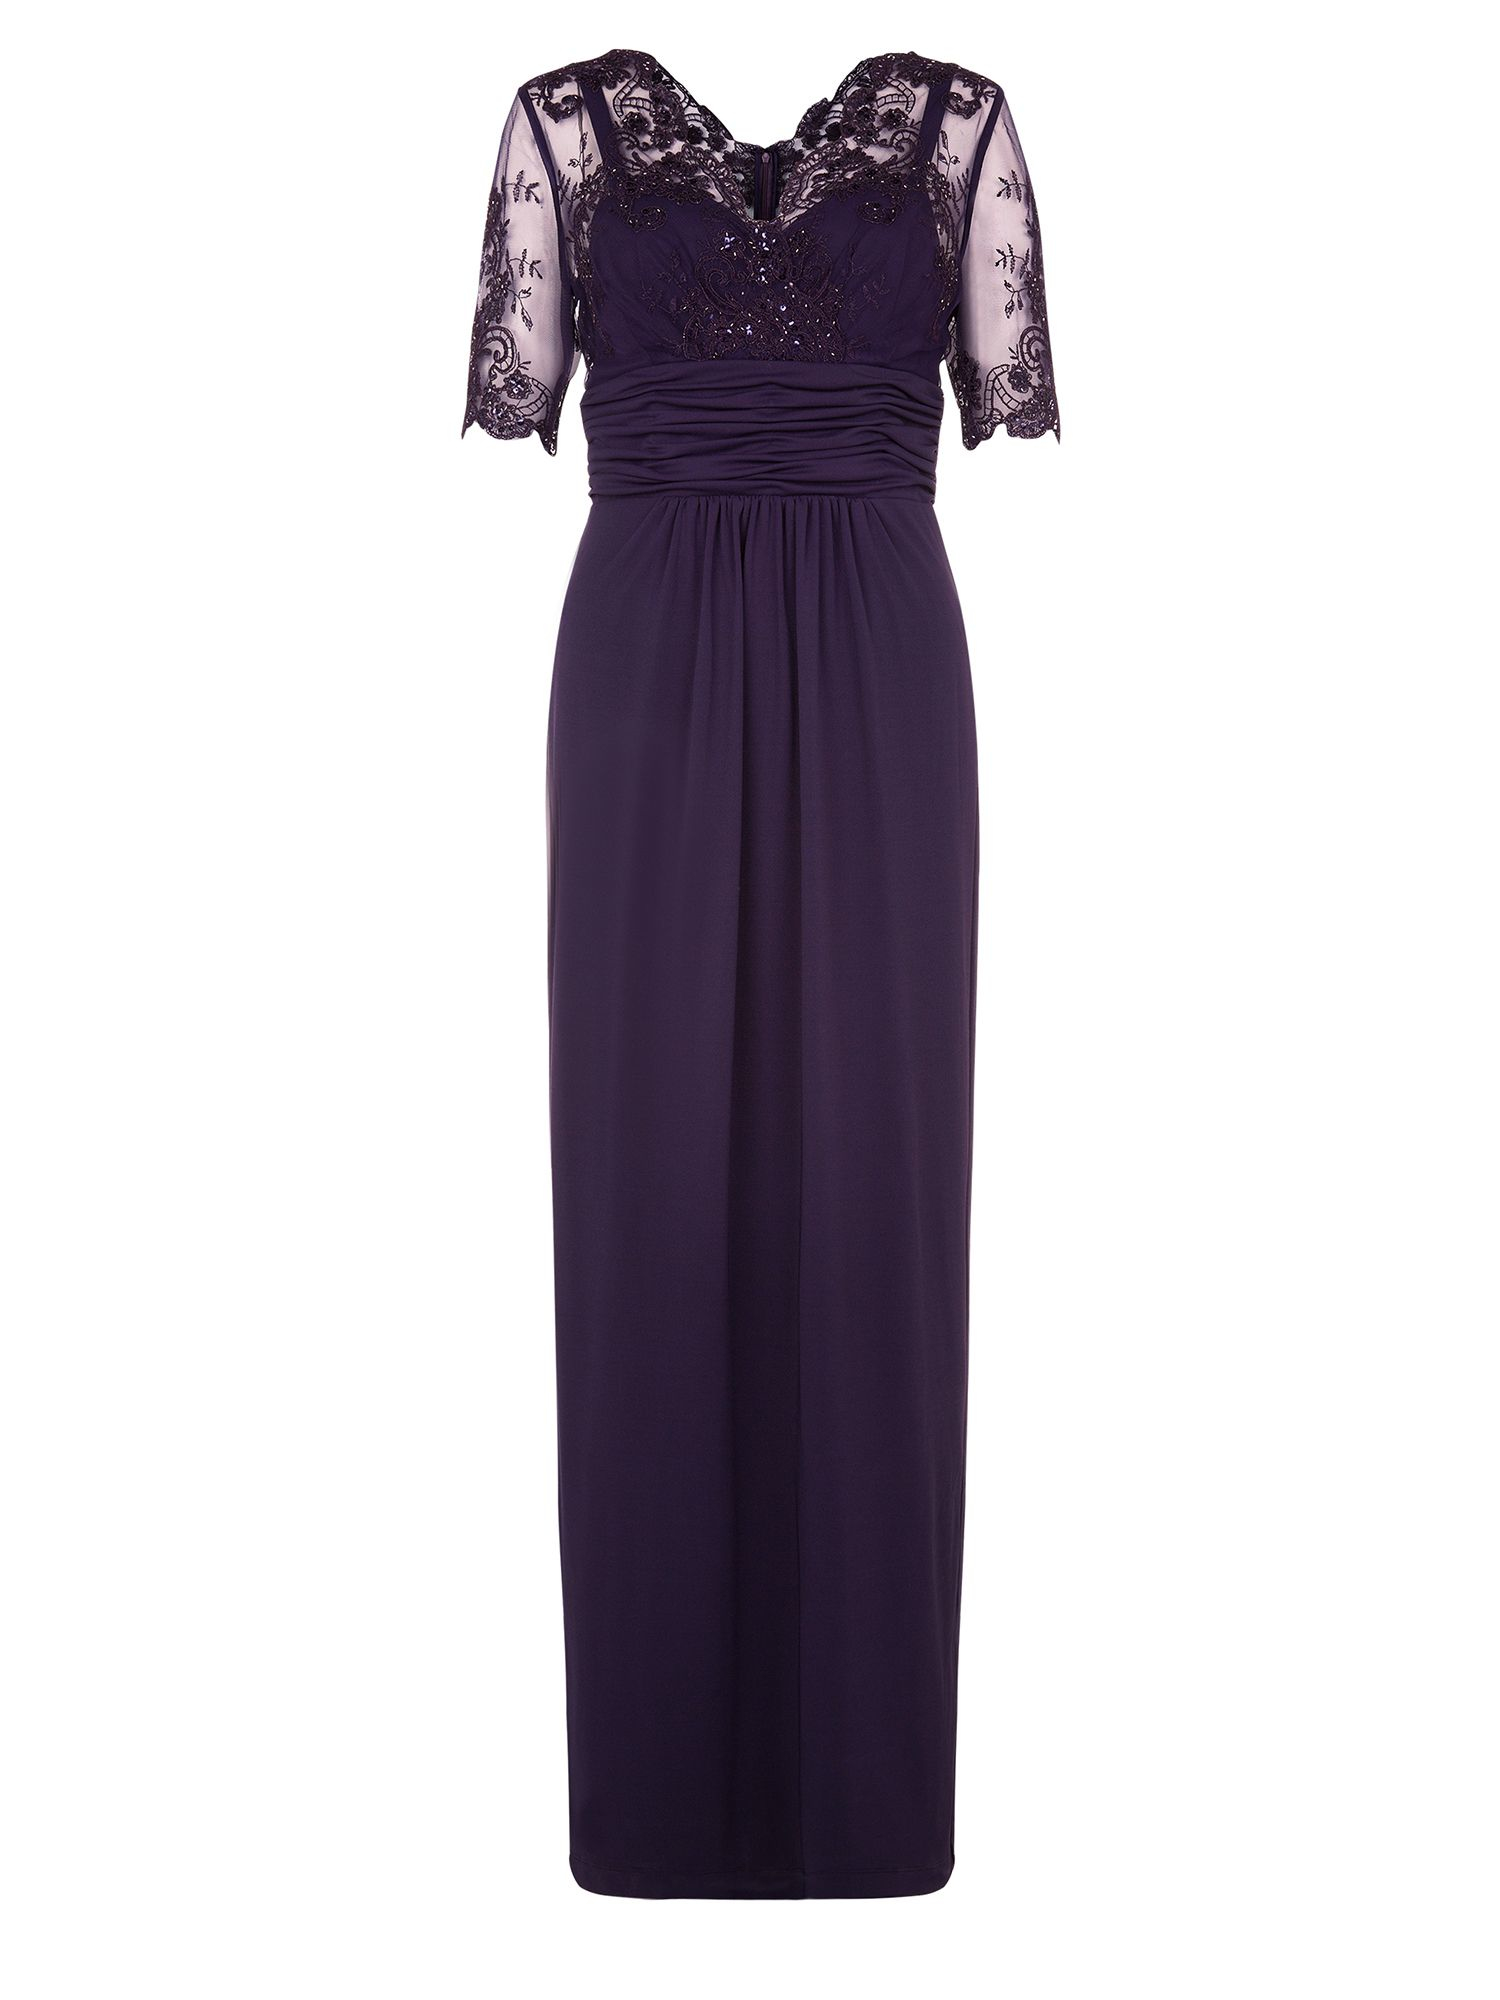 Jacques vert Embroidered Mesh Top Jersey Maxi Dress in Purple | Lyst